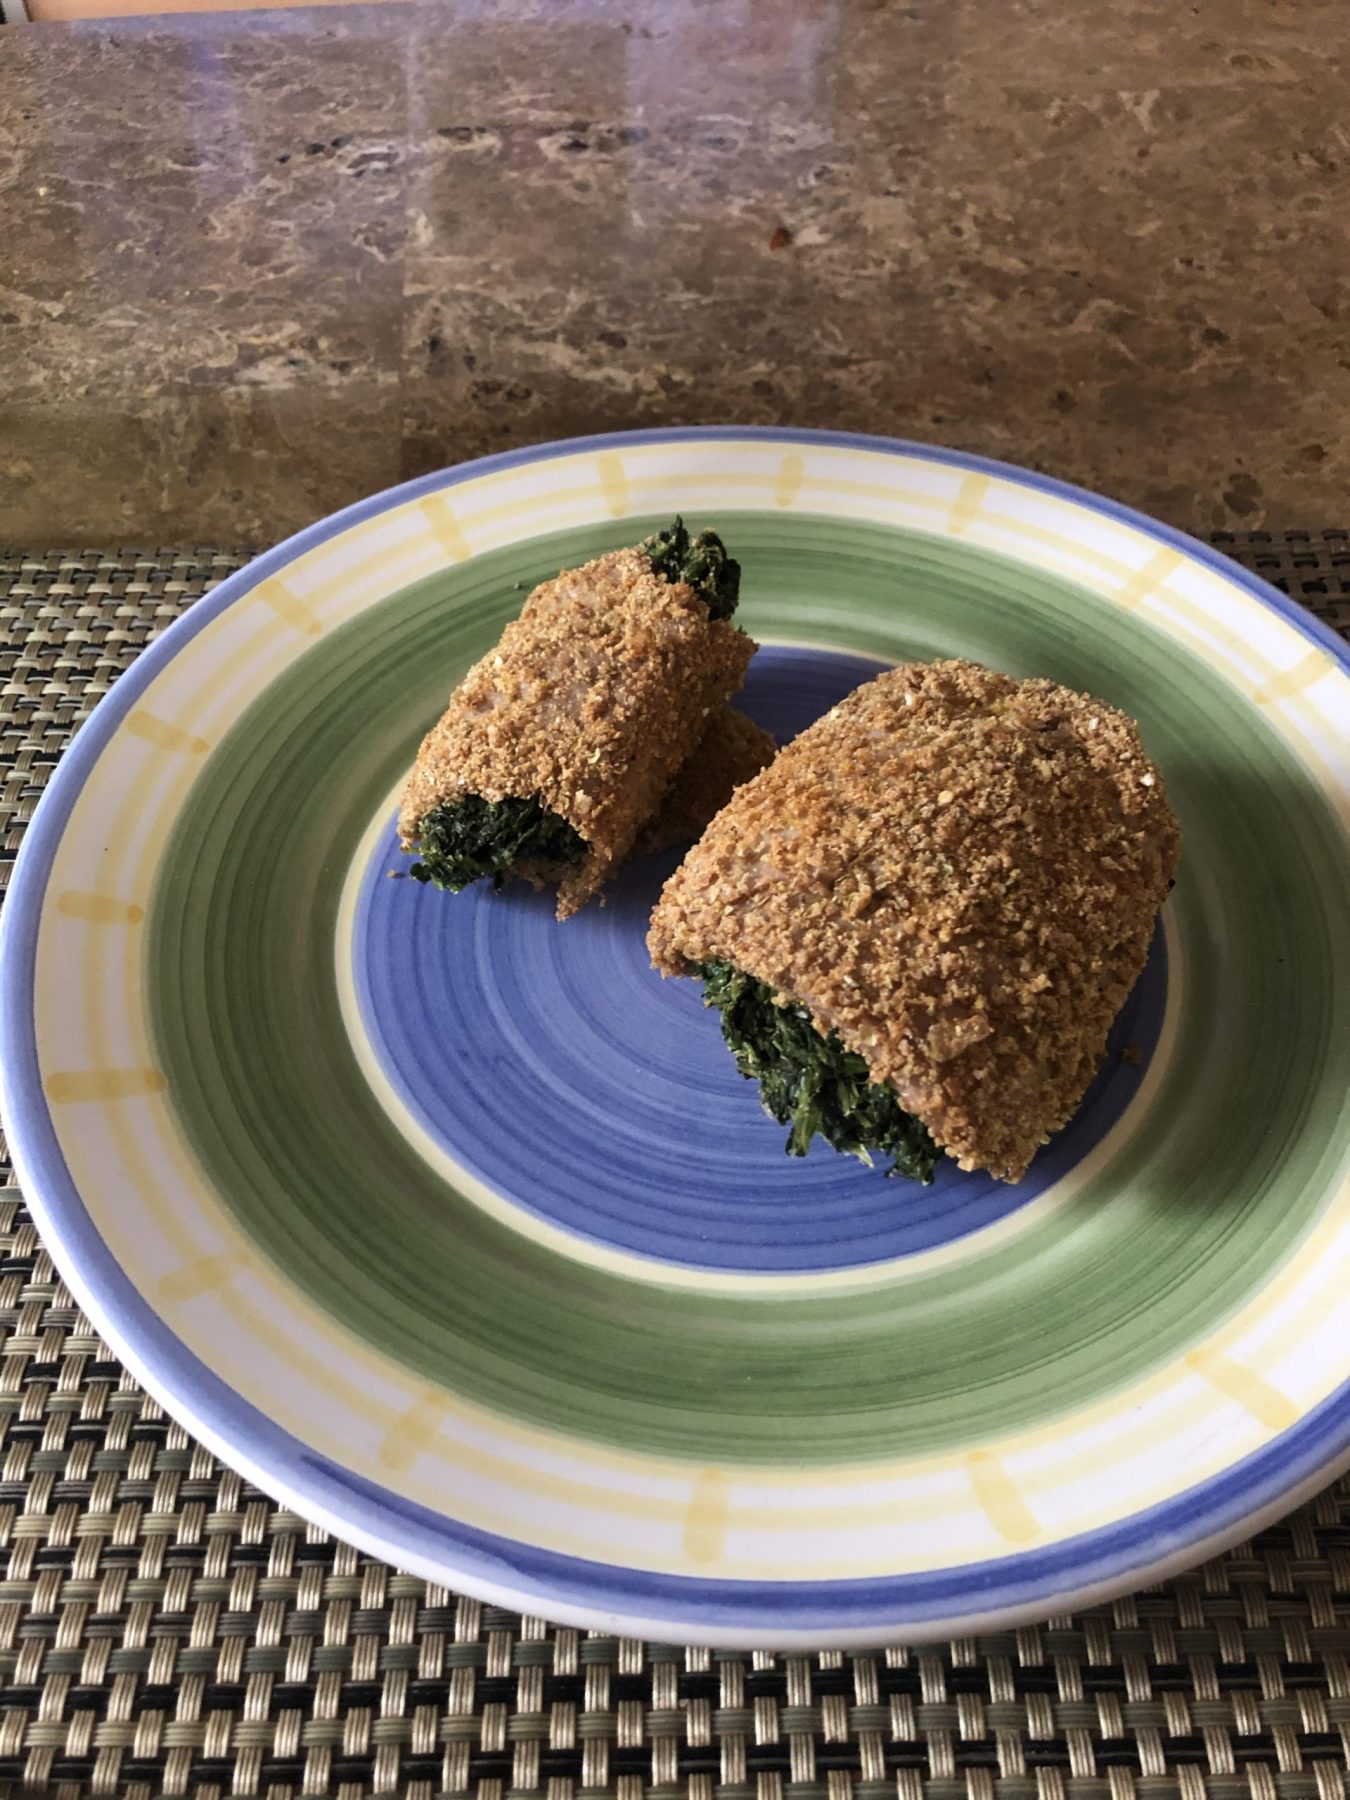 Spinach Stuffed Veal